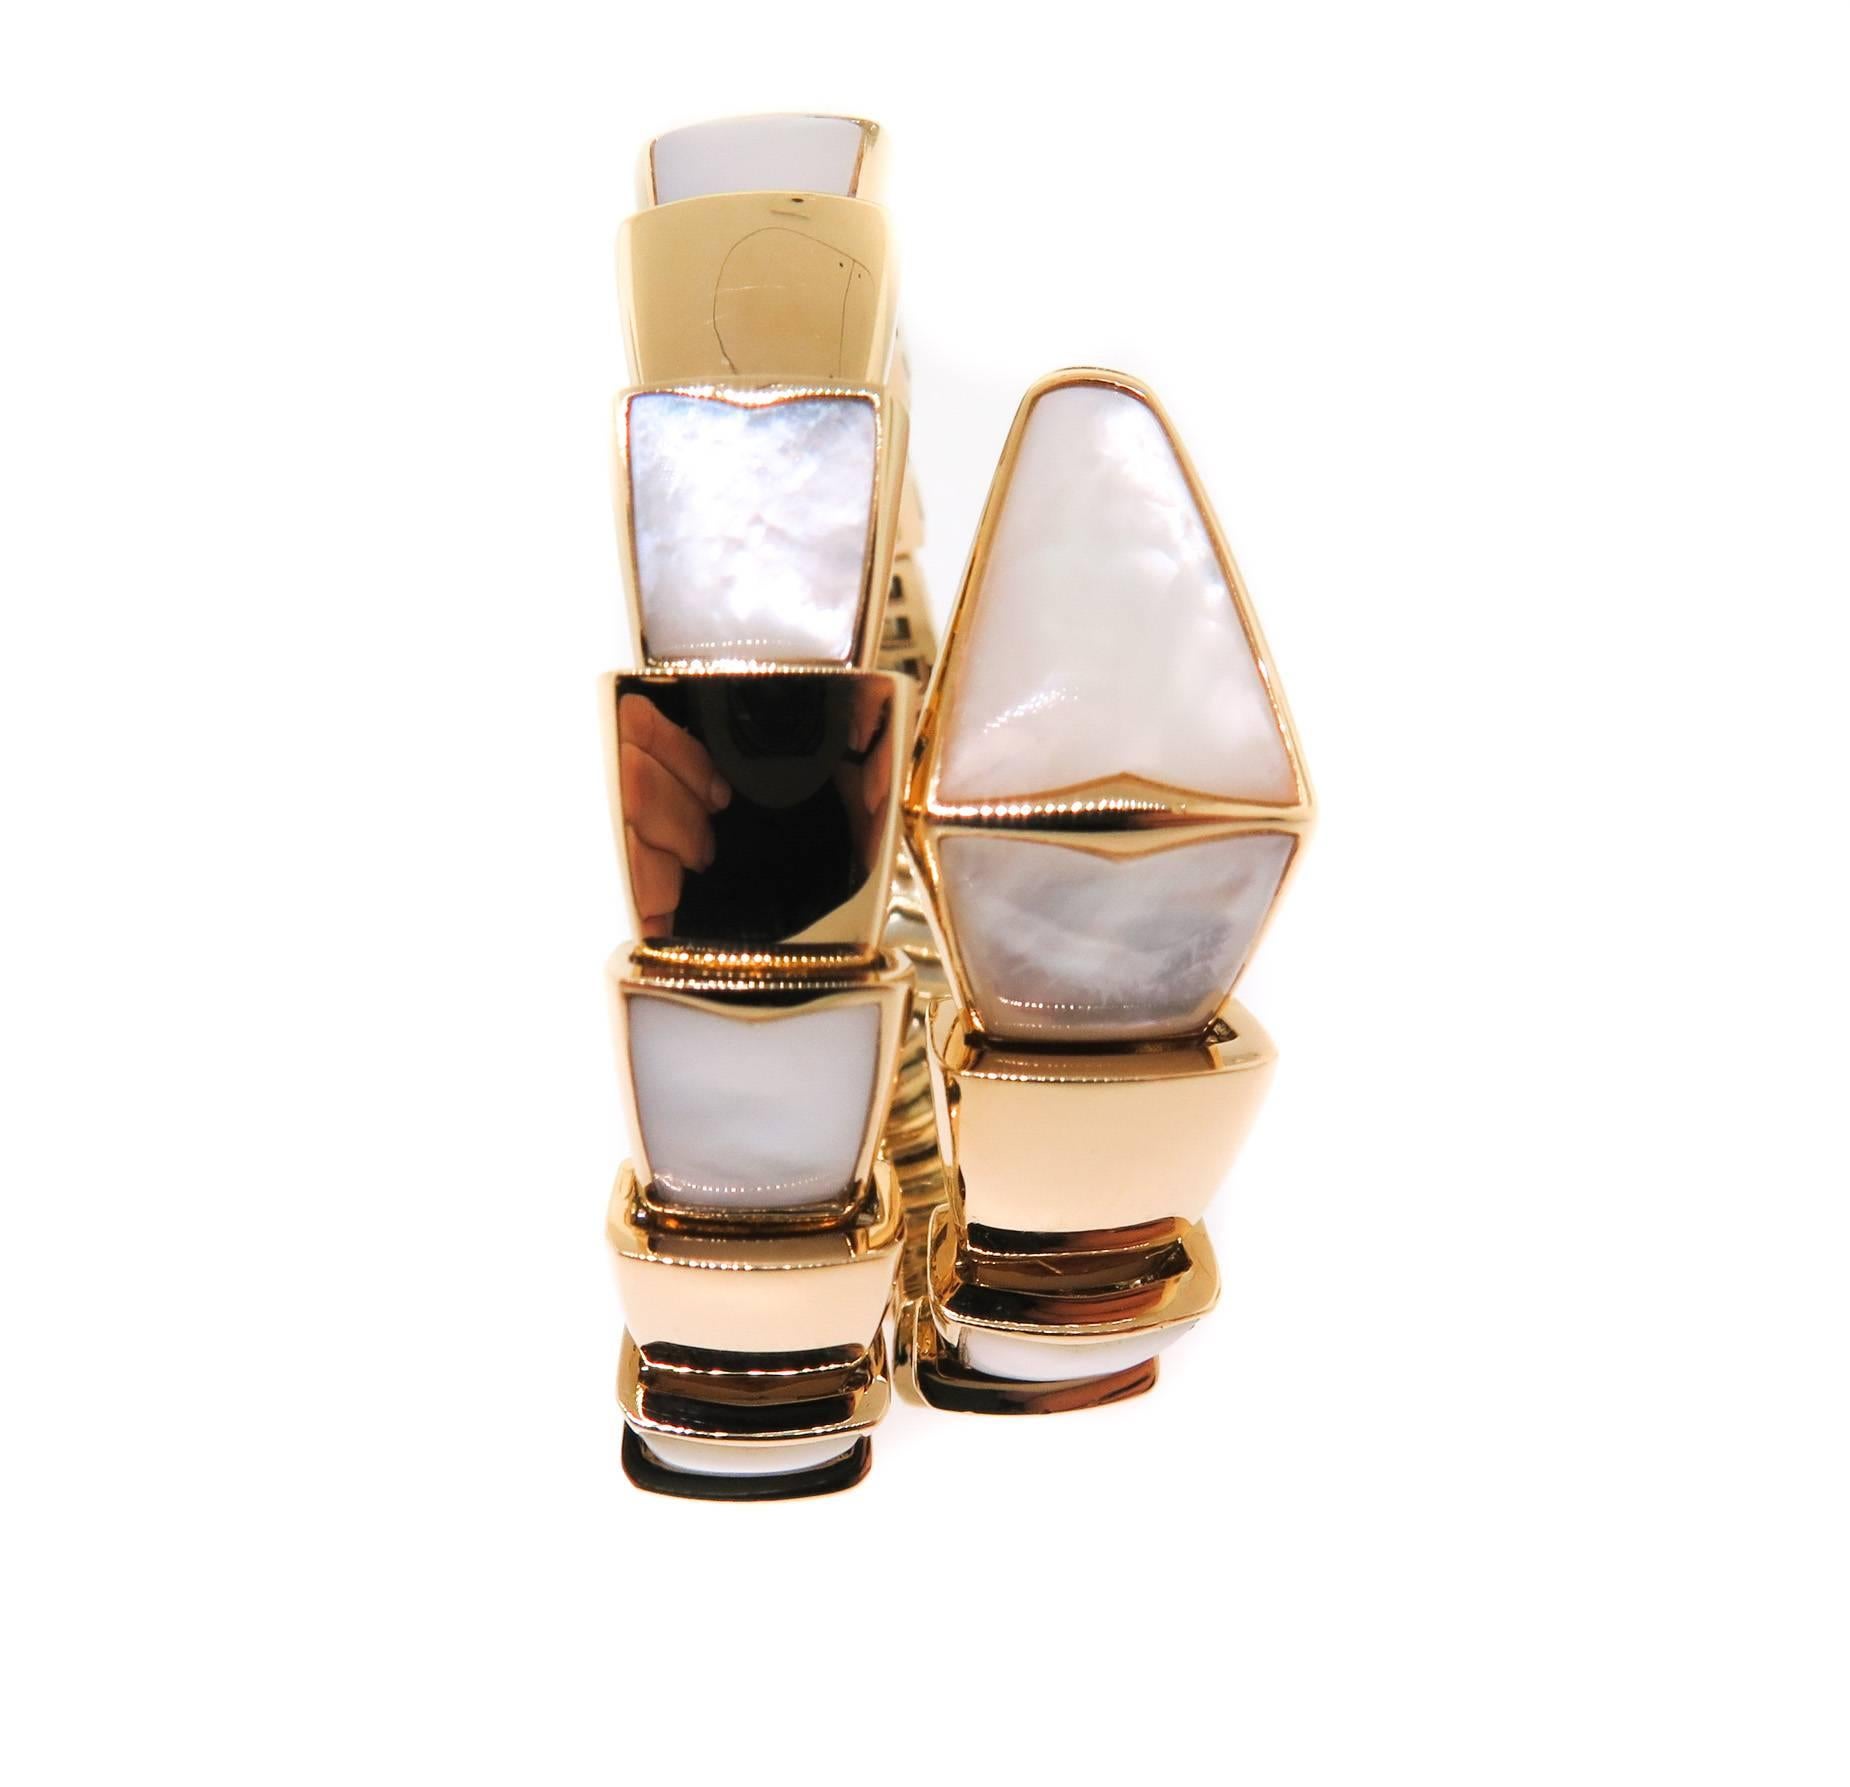 18k Yellow Gold  Bulgari 'Serpenti' wrap around bracelet in 18k yellow gold, designed as a sprung bangle with alternating 'scales' of gold and mother-of-pearl.

Signed Bulgari.